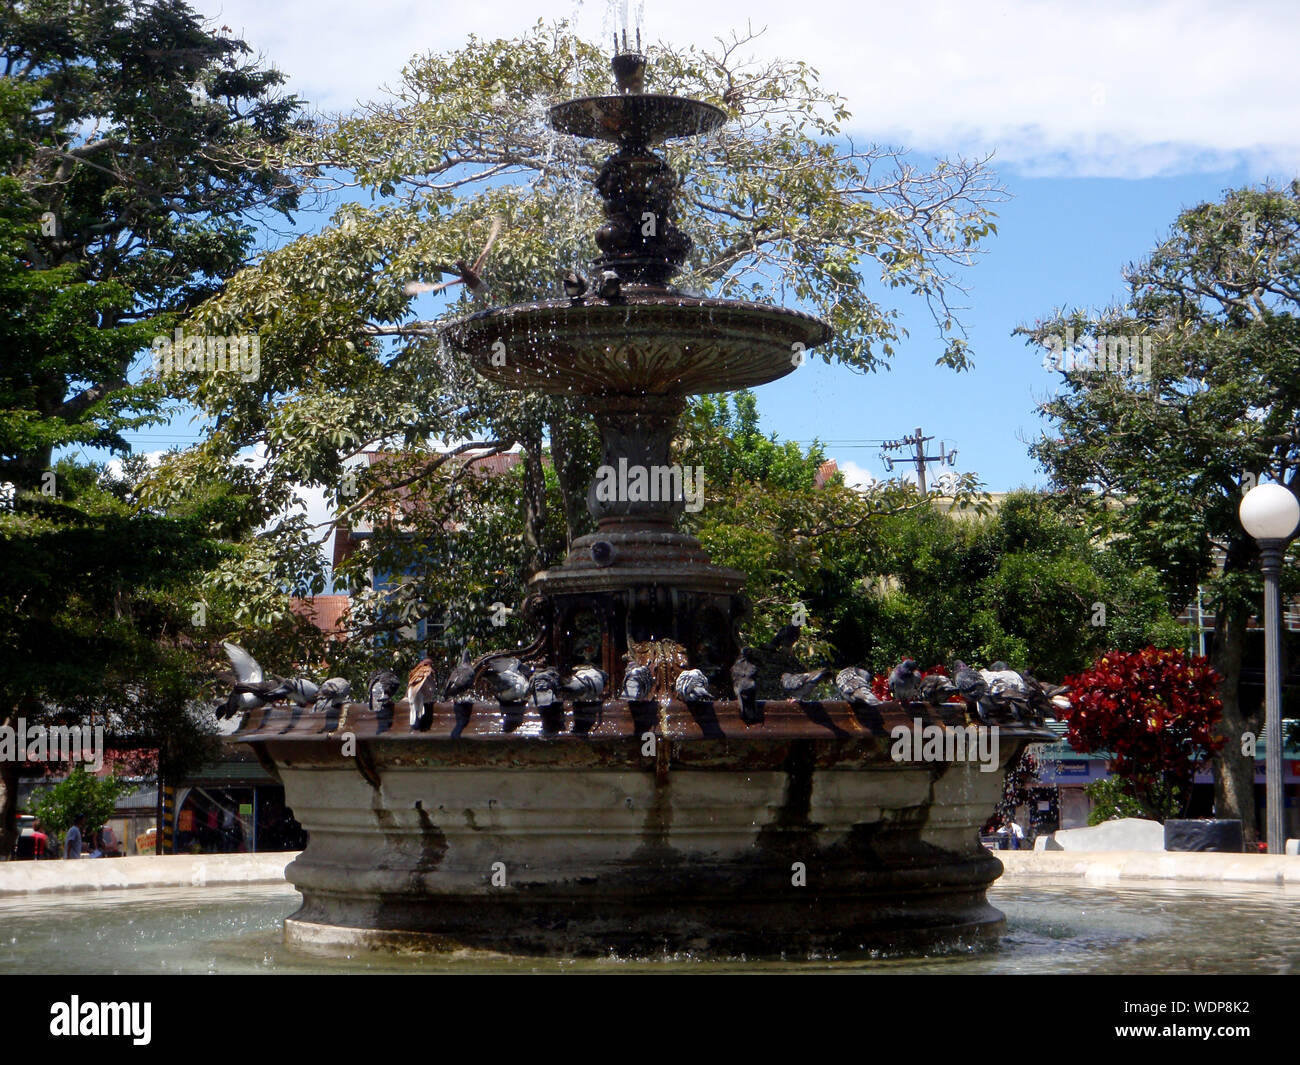 Pidgins bath in Water Fountain at mid-day located in Nicolás Ulloa Central Park in Heredia, Costa Rica Stock Photo